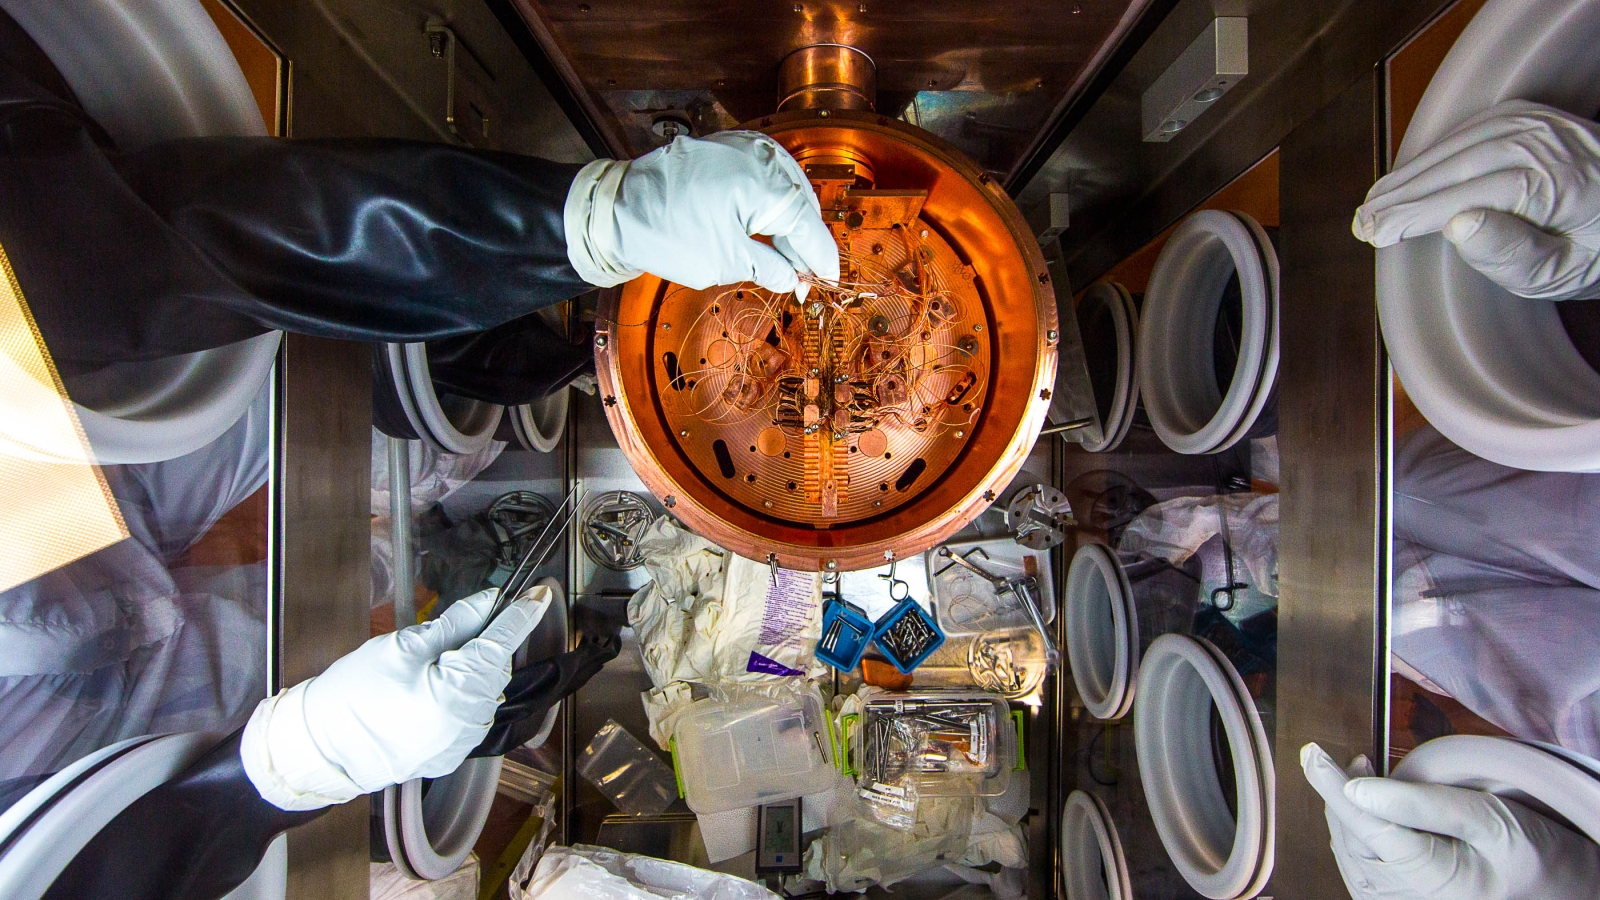 Researchers assemble strings inside the glovebox